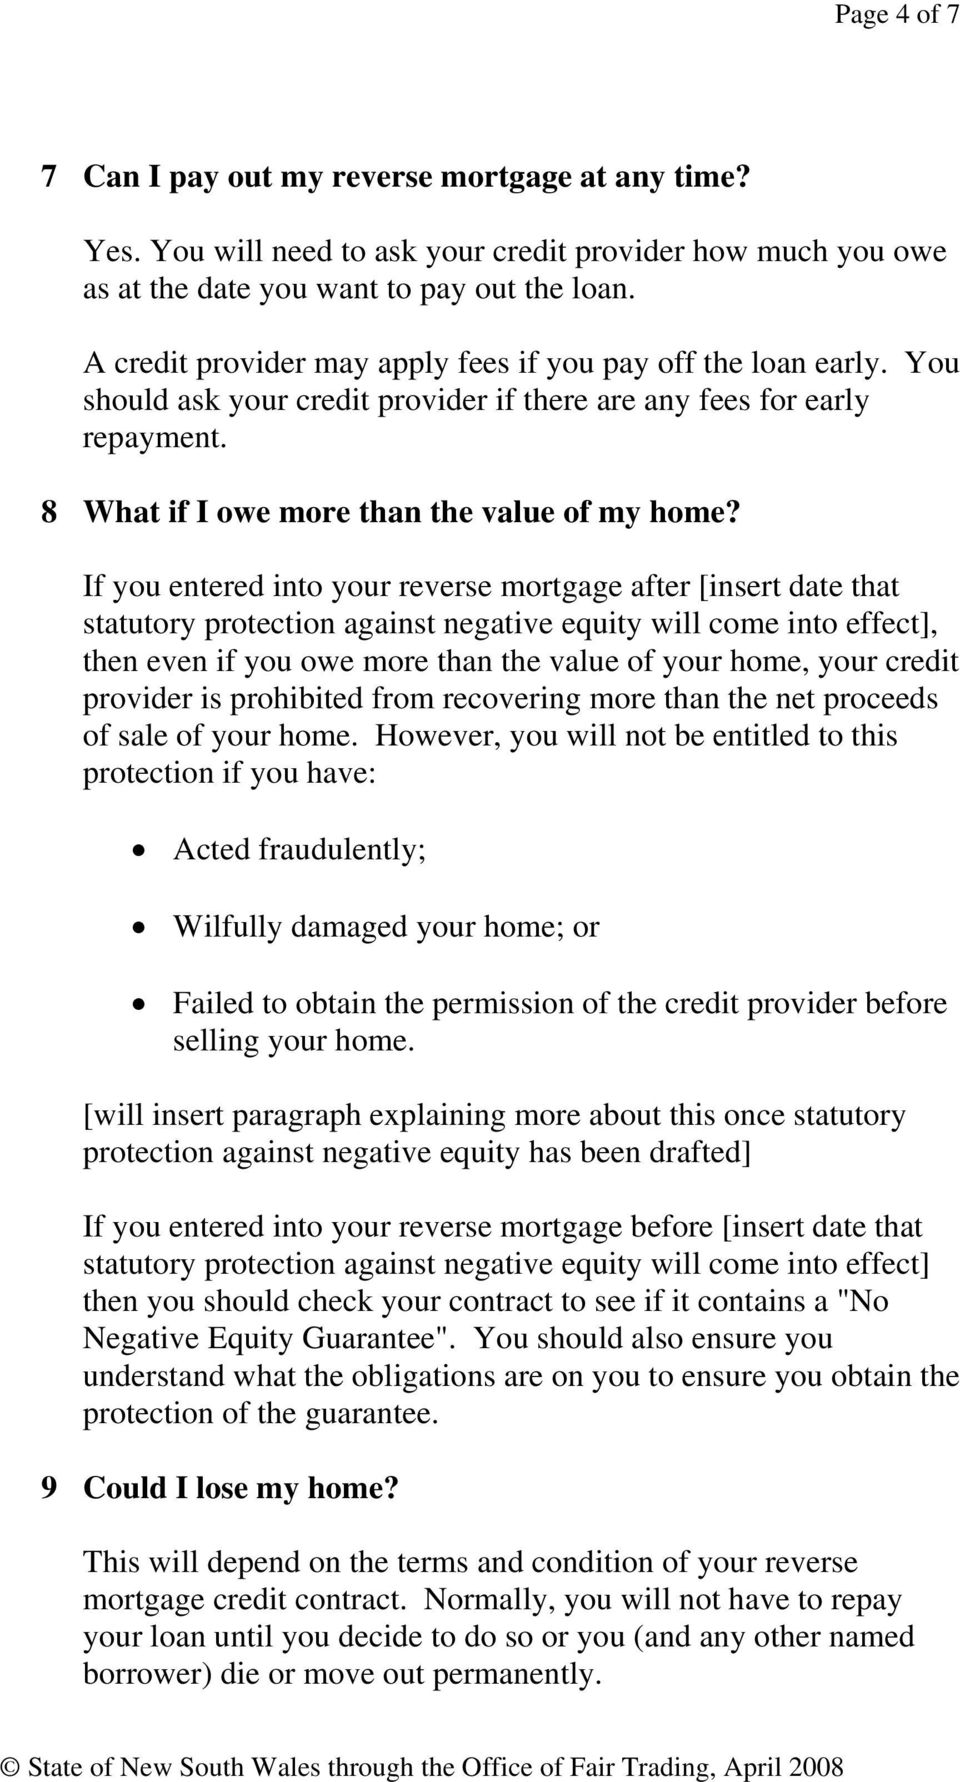 If you entered into your reverse mortgage after [insert date that statutory protection against negative equity will come into effect], then even if you owe more than the value of your home, your